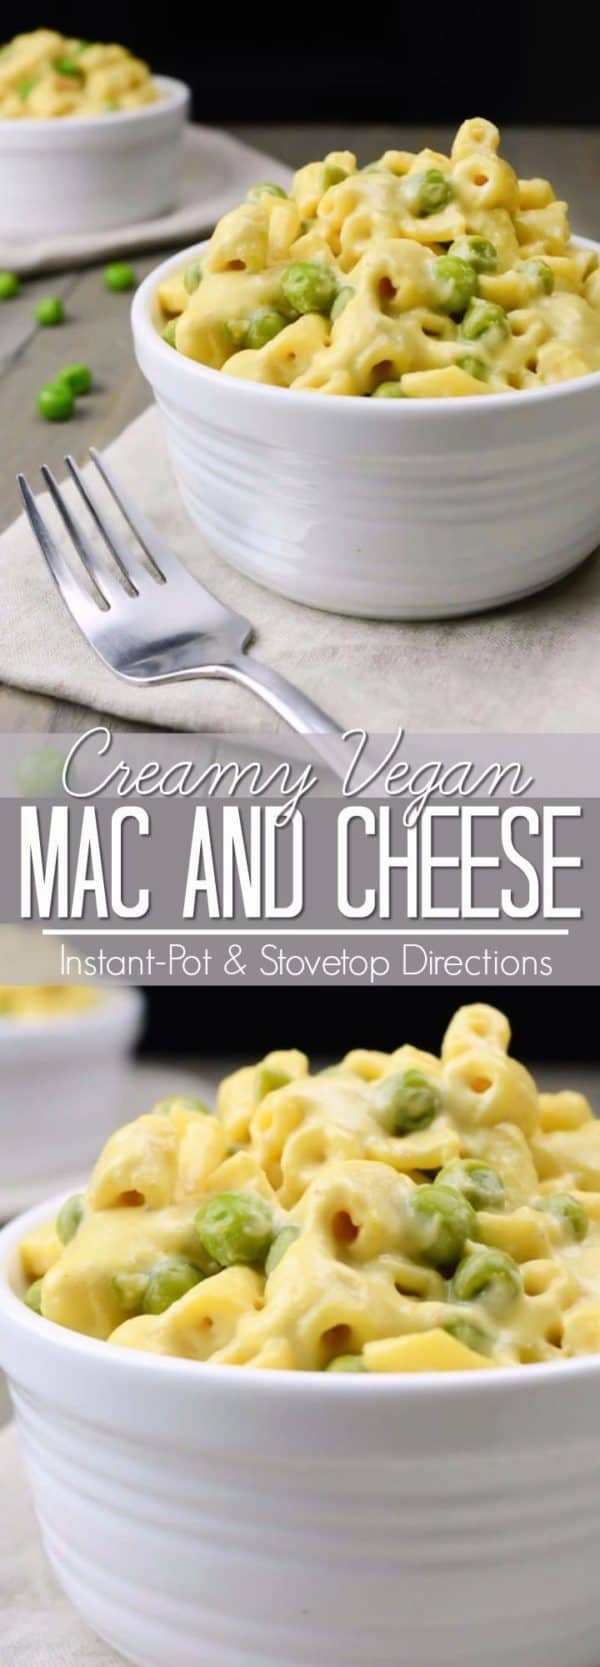 Vegan mac and cheese collage for Pinterest.